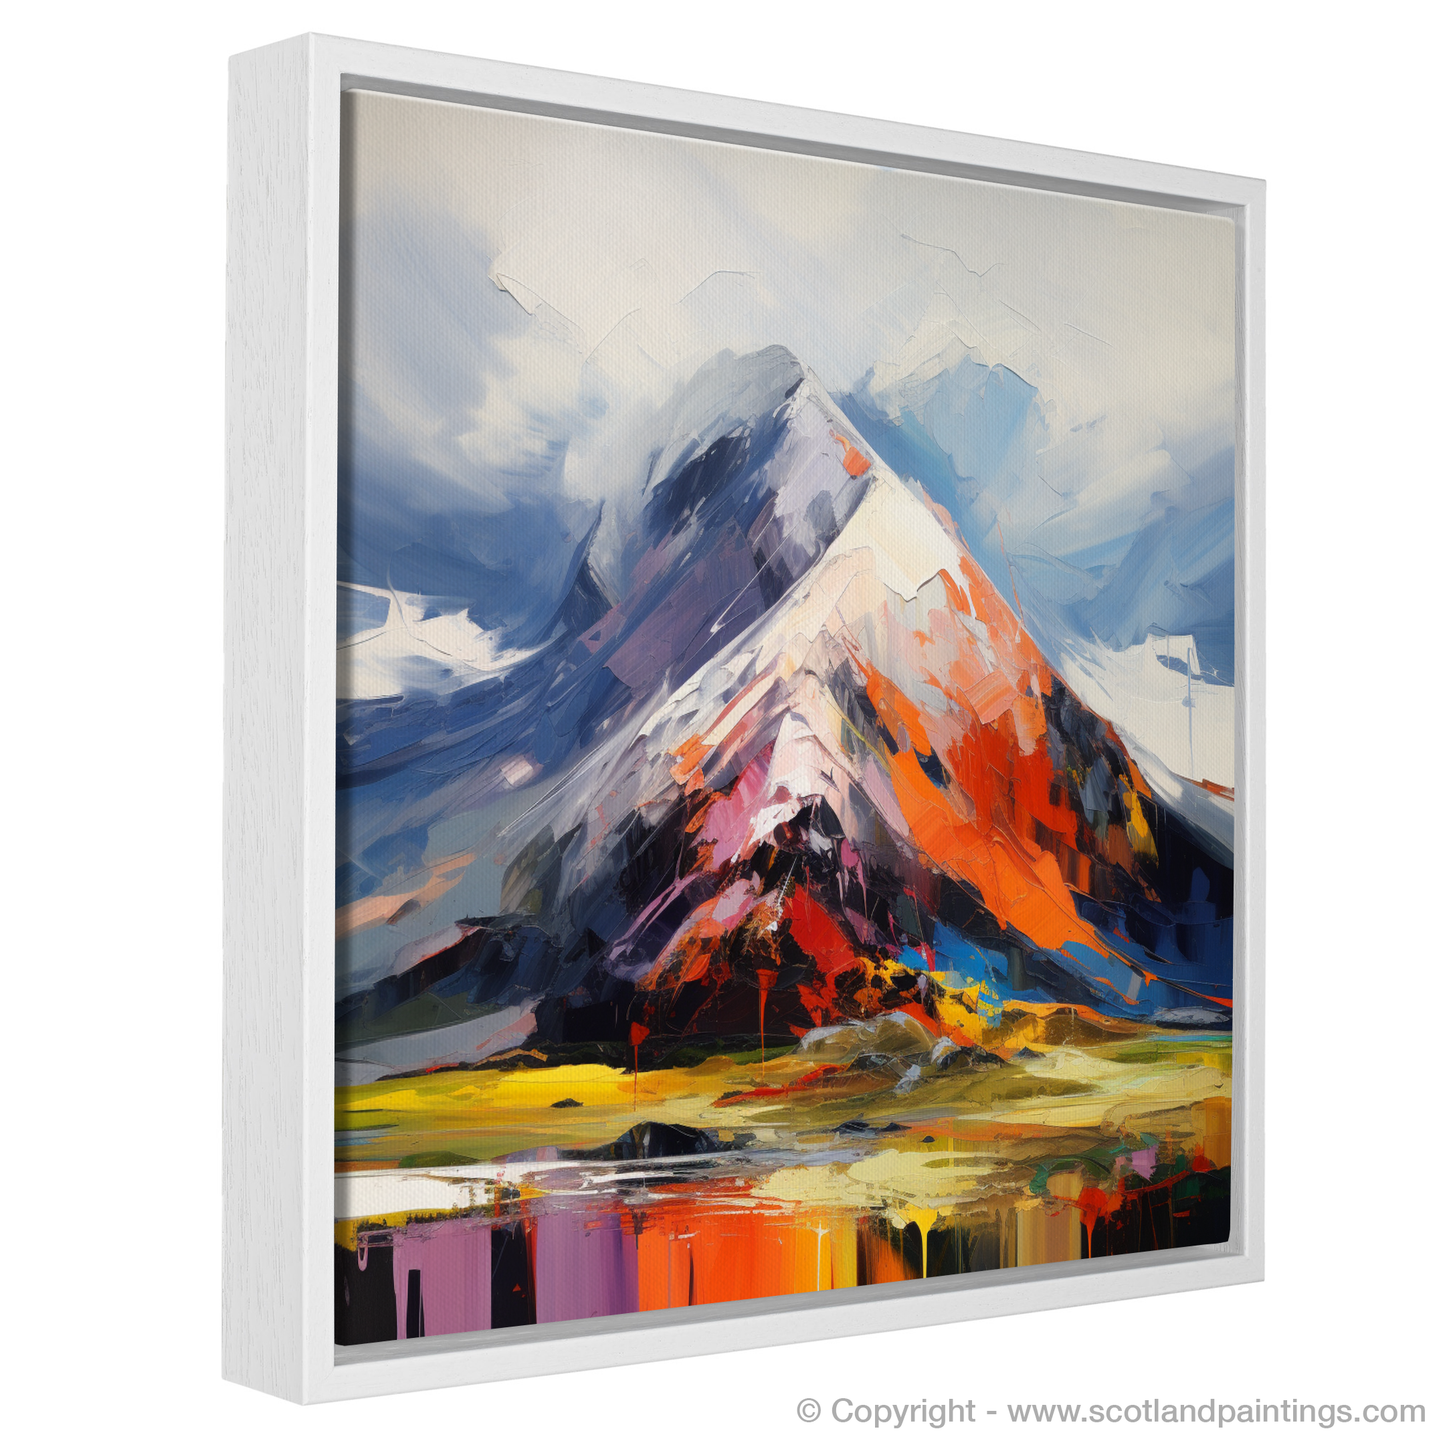 Painting and Art Print of Ben Nevis entitled "Fiery Summit: The Essence of Ben Nevis".